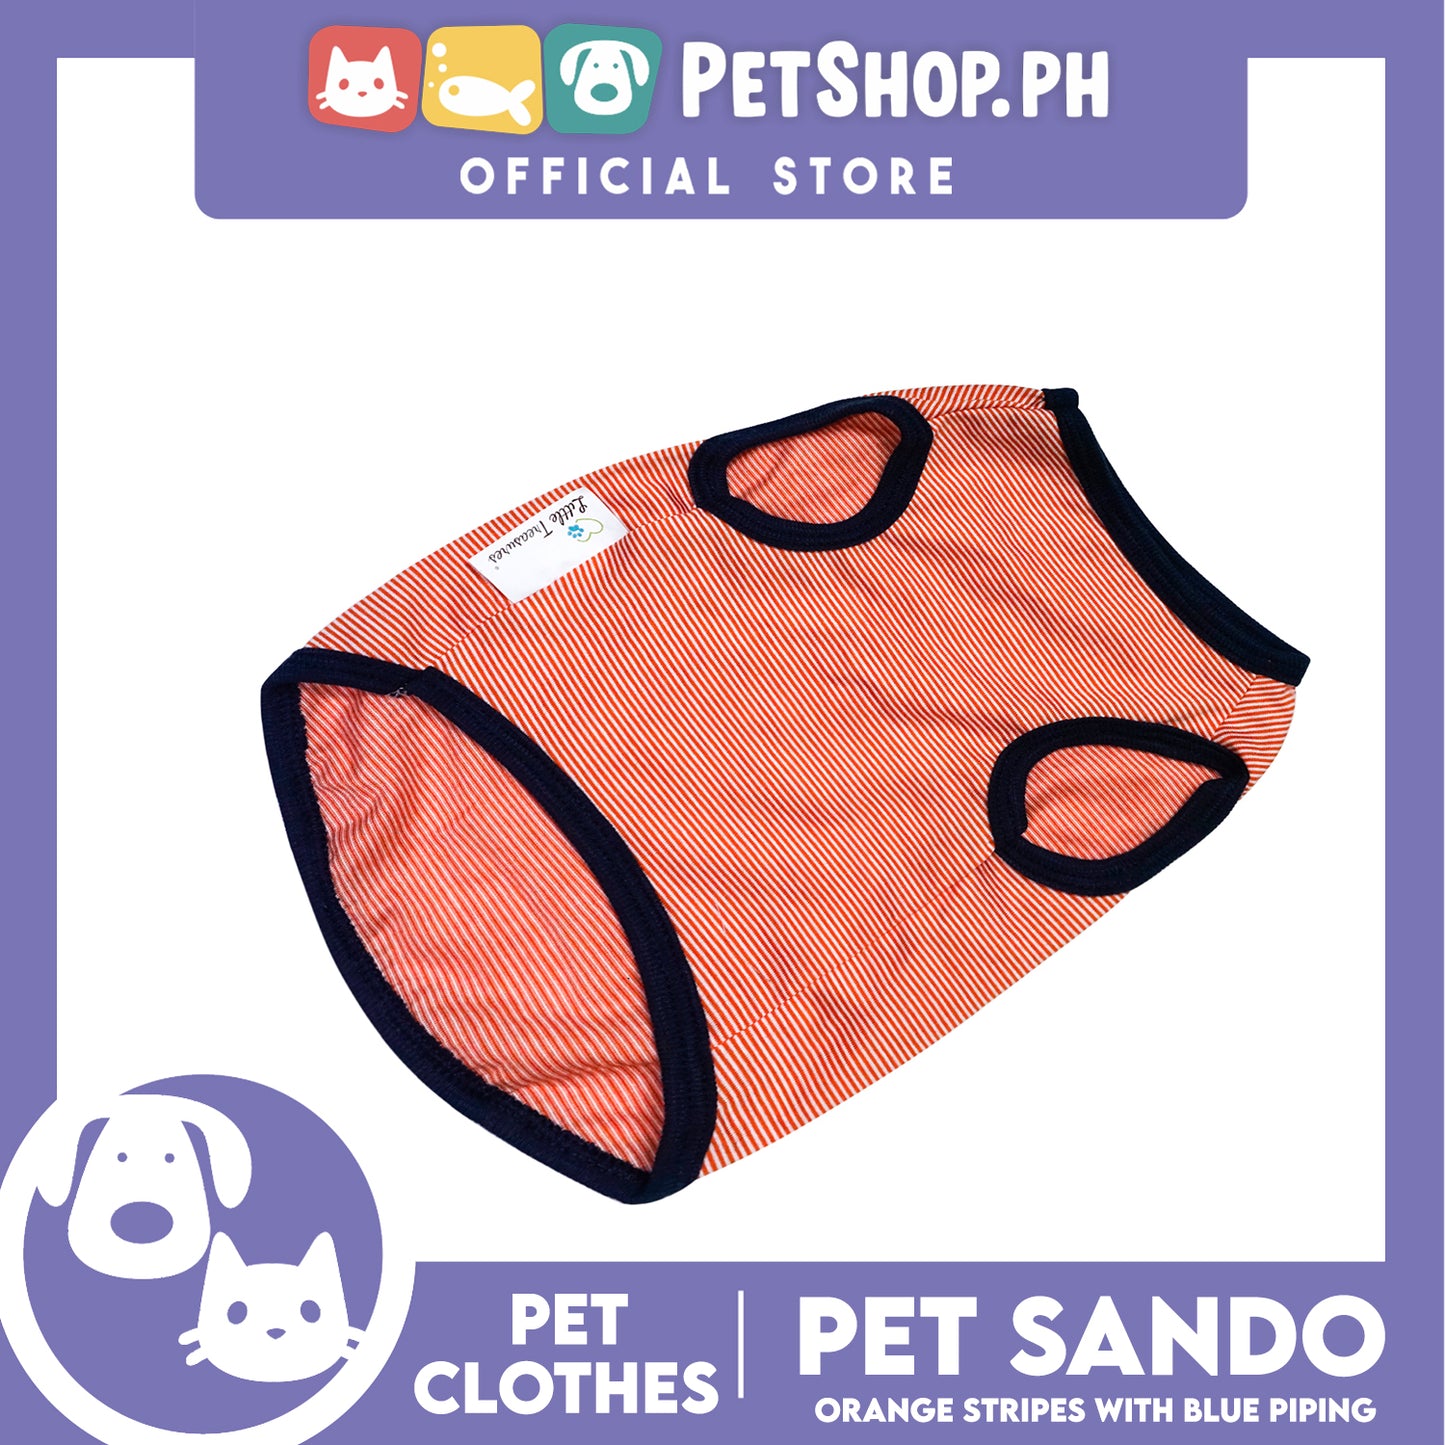 Pet Sando Orange Stripes with Blue Piping (Large) Pet Shirt Clothes Perfect fit for Dogs